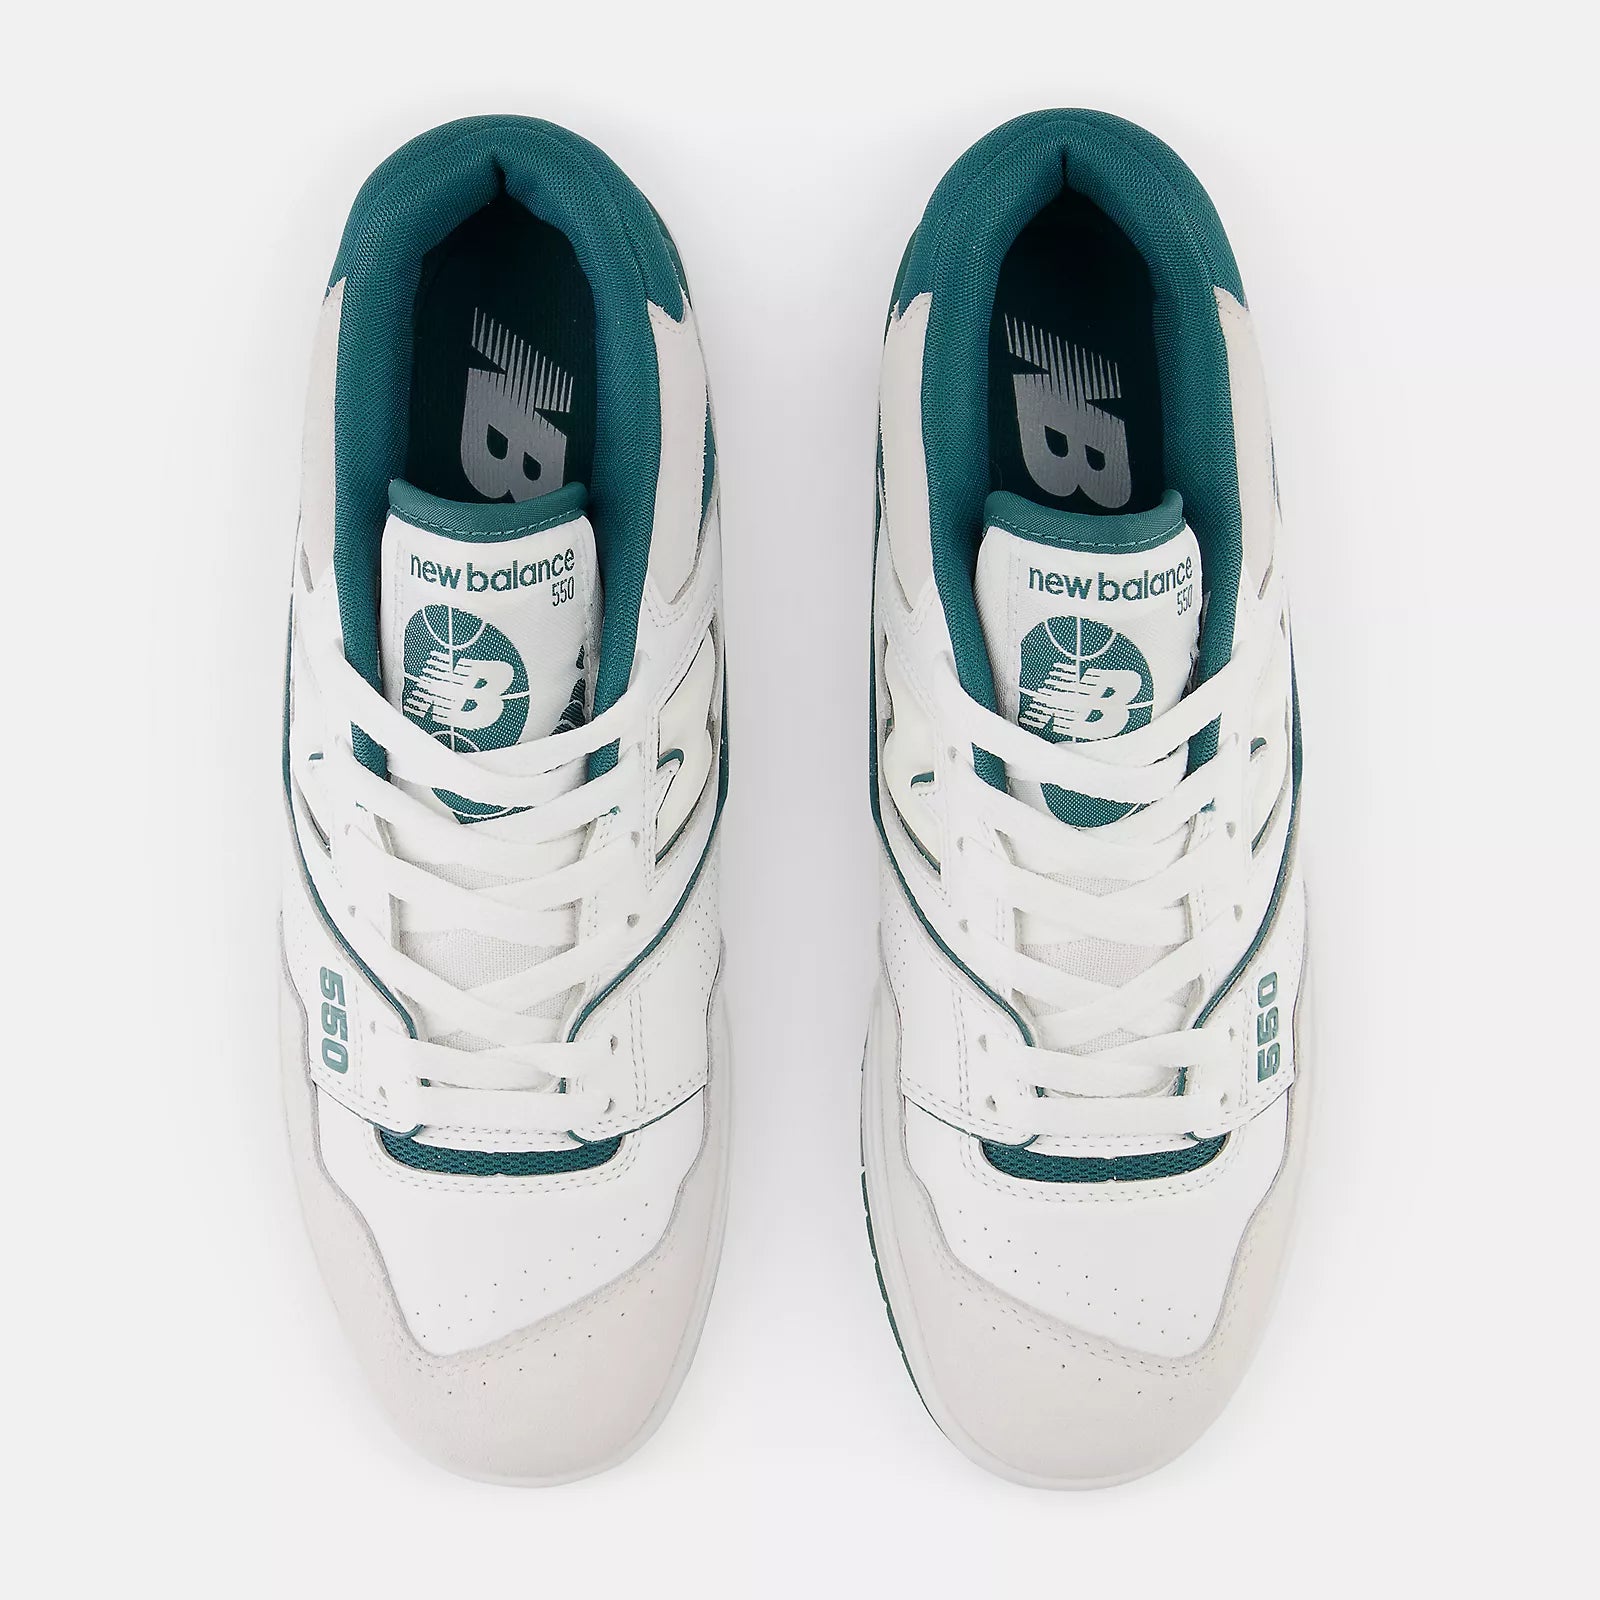 NEW BALANCE Unisex Sneakers BB550 White/Teal